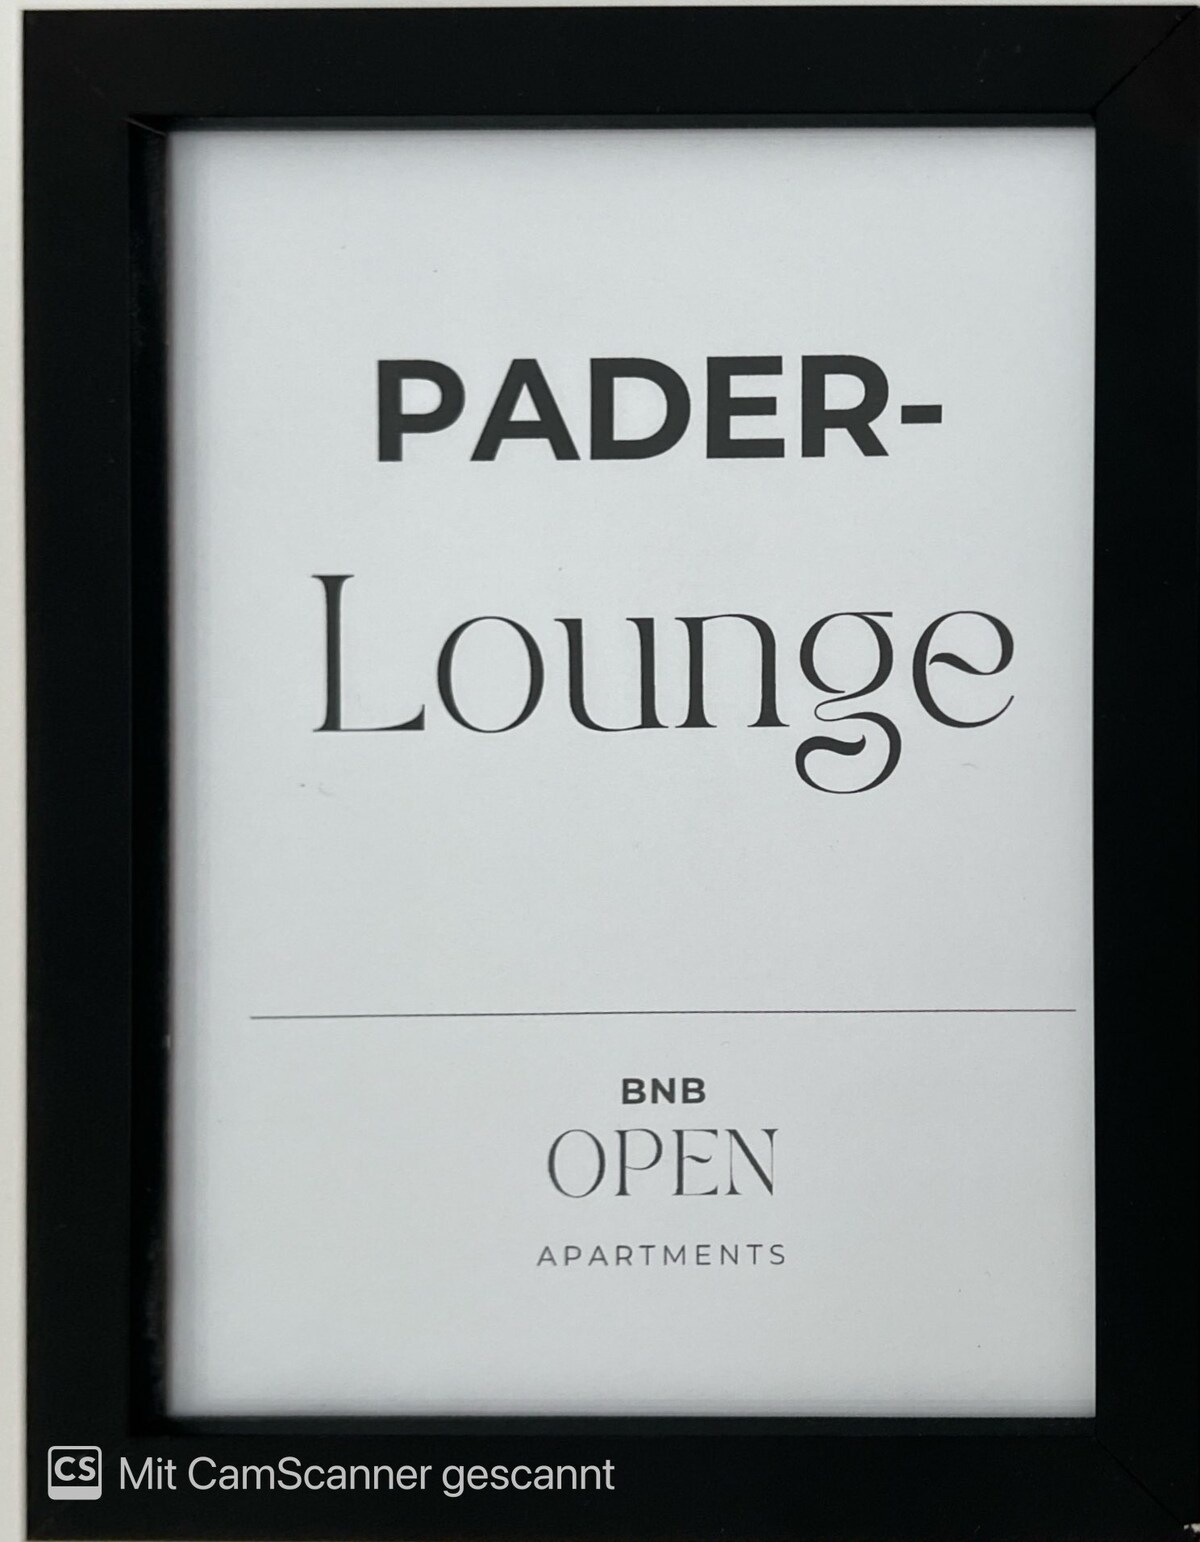 BnB Open Apartments Pader-Lounge